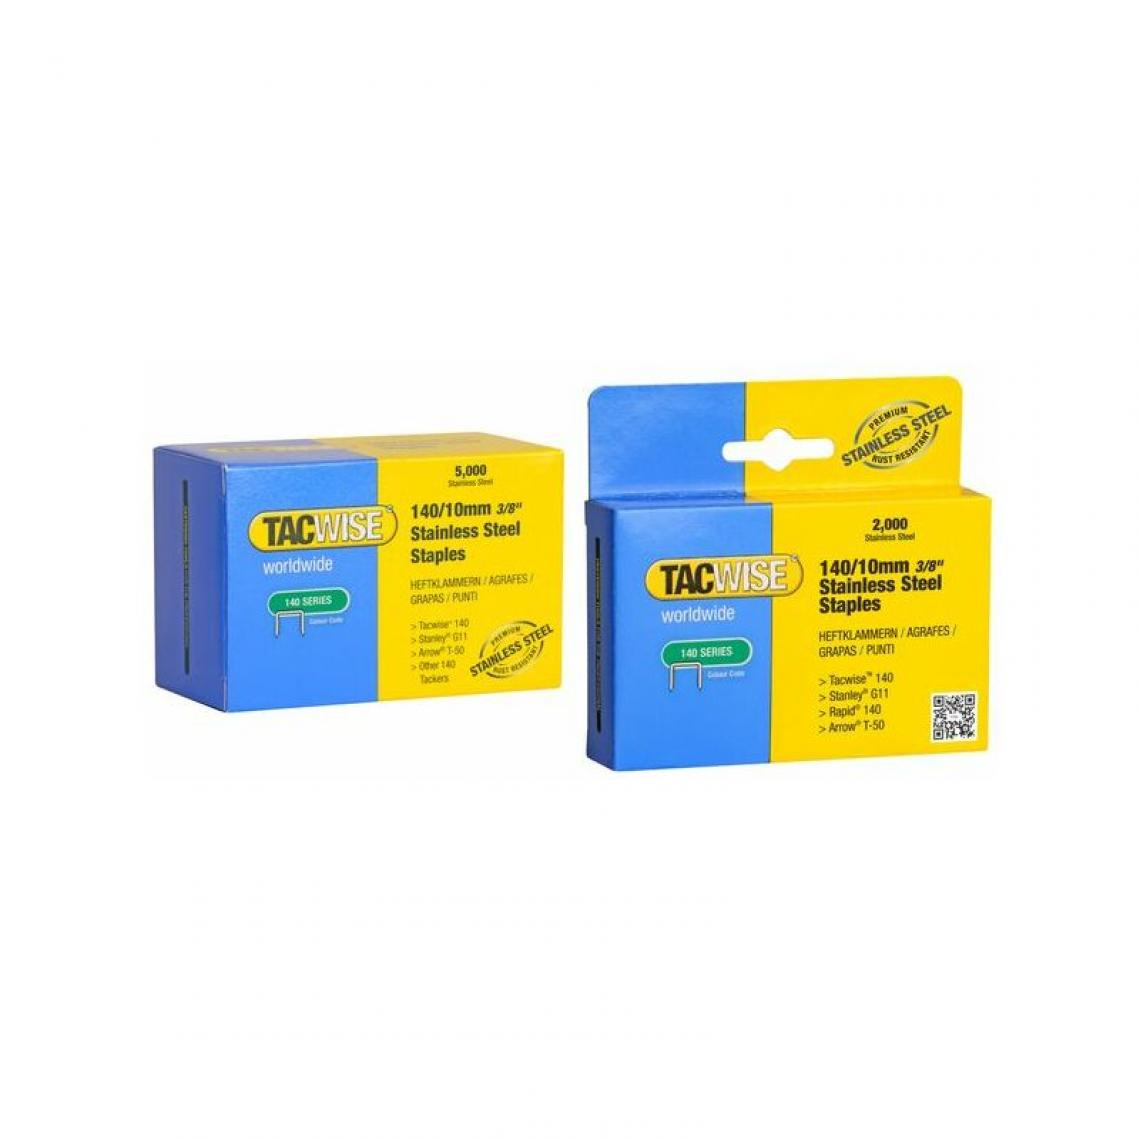 Tacwise - TACWISE Agrafes 140/8 mm, acier inoxydable, 2.000 pièces () - Boulonnerie